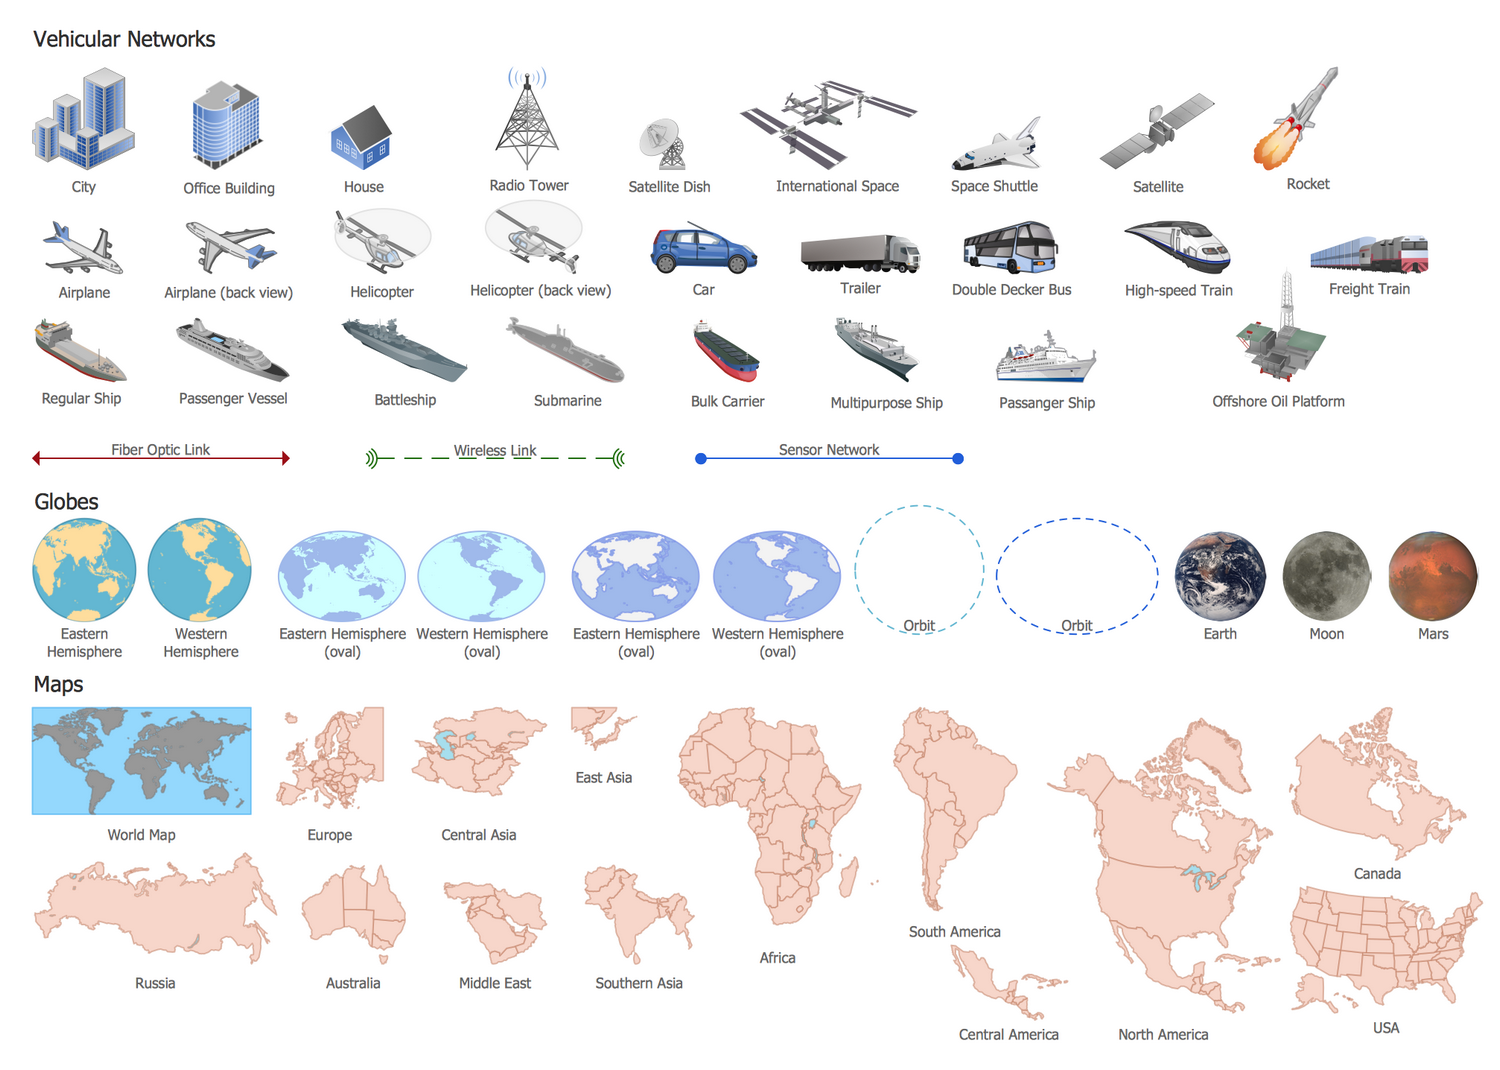 Global Vehicular Networks Objects